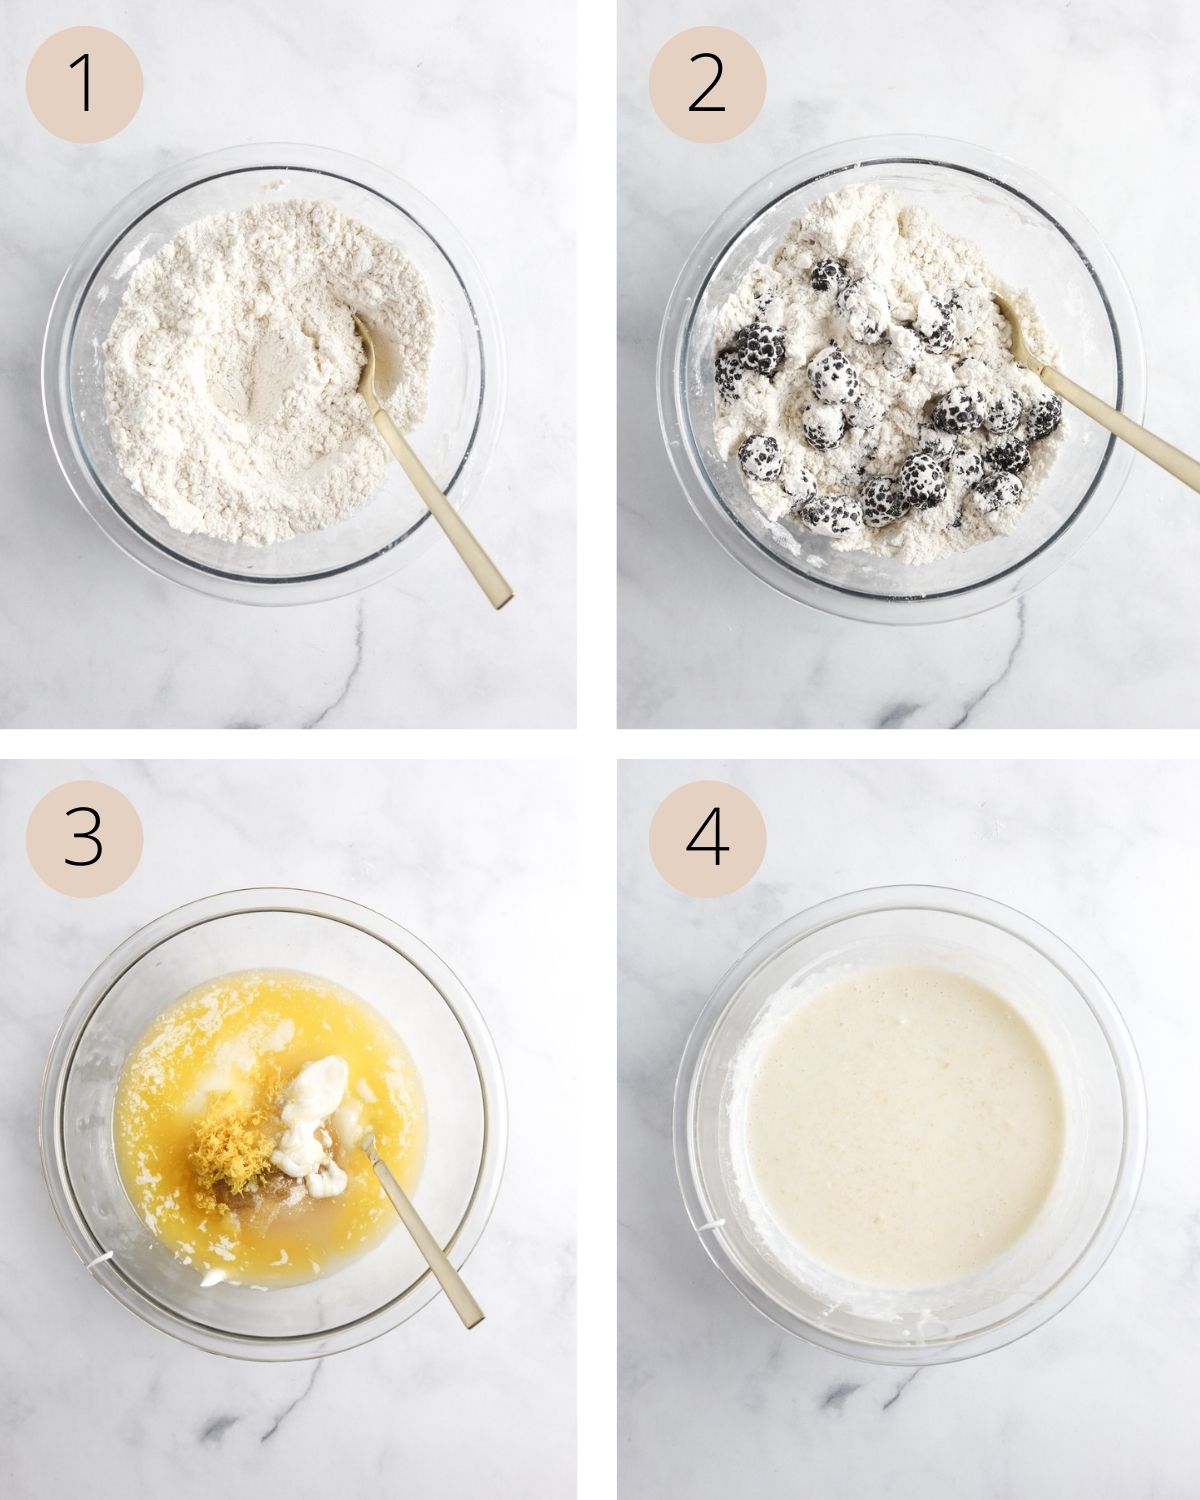 a collage of four images demonstrating how to mix the dry ingredients, fold in the blackberries, and whisk the wet ingredients until a creamy mixture forms.